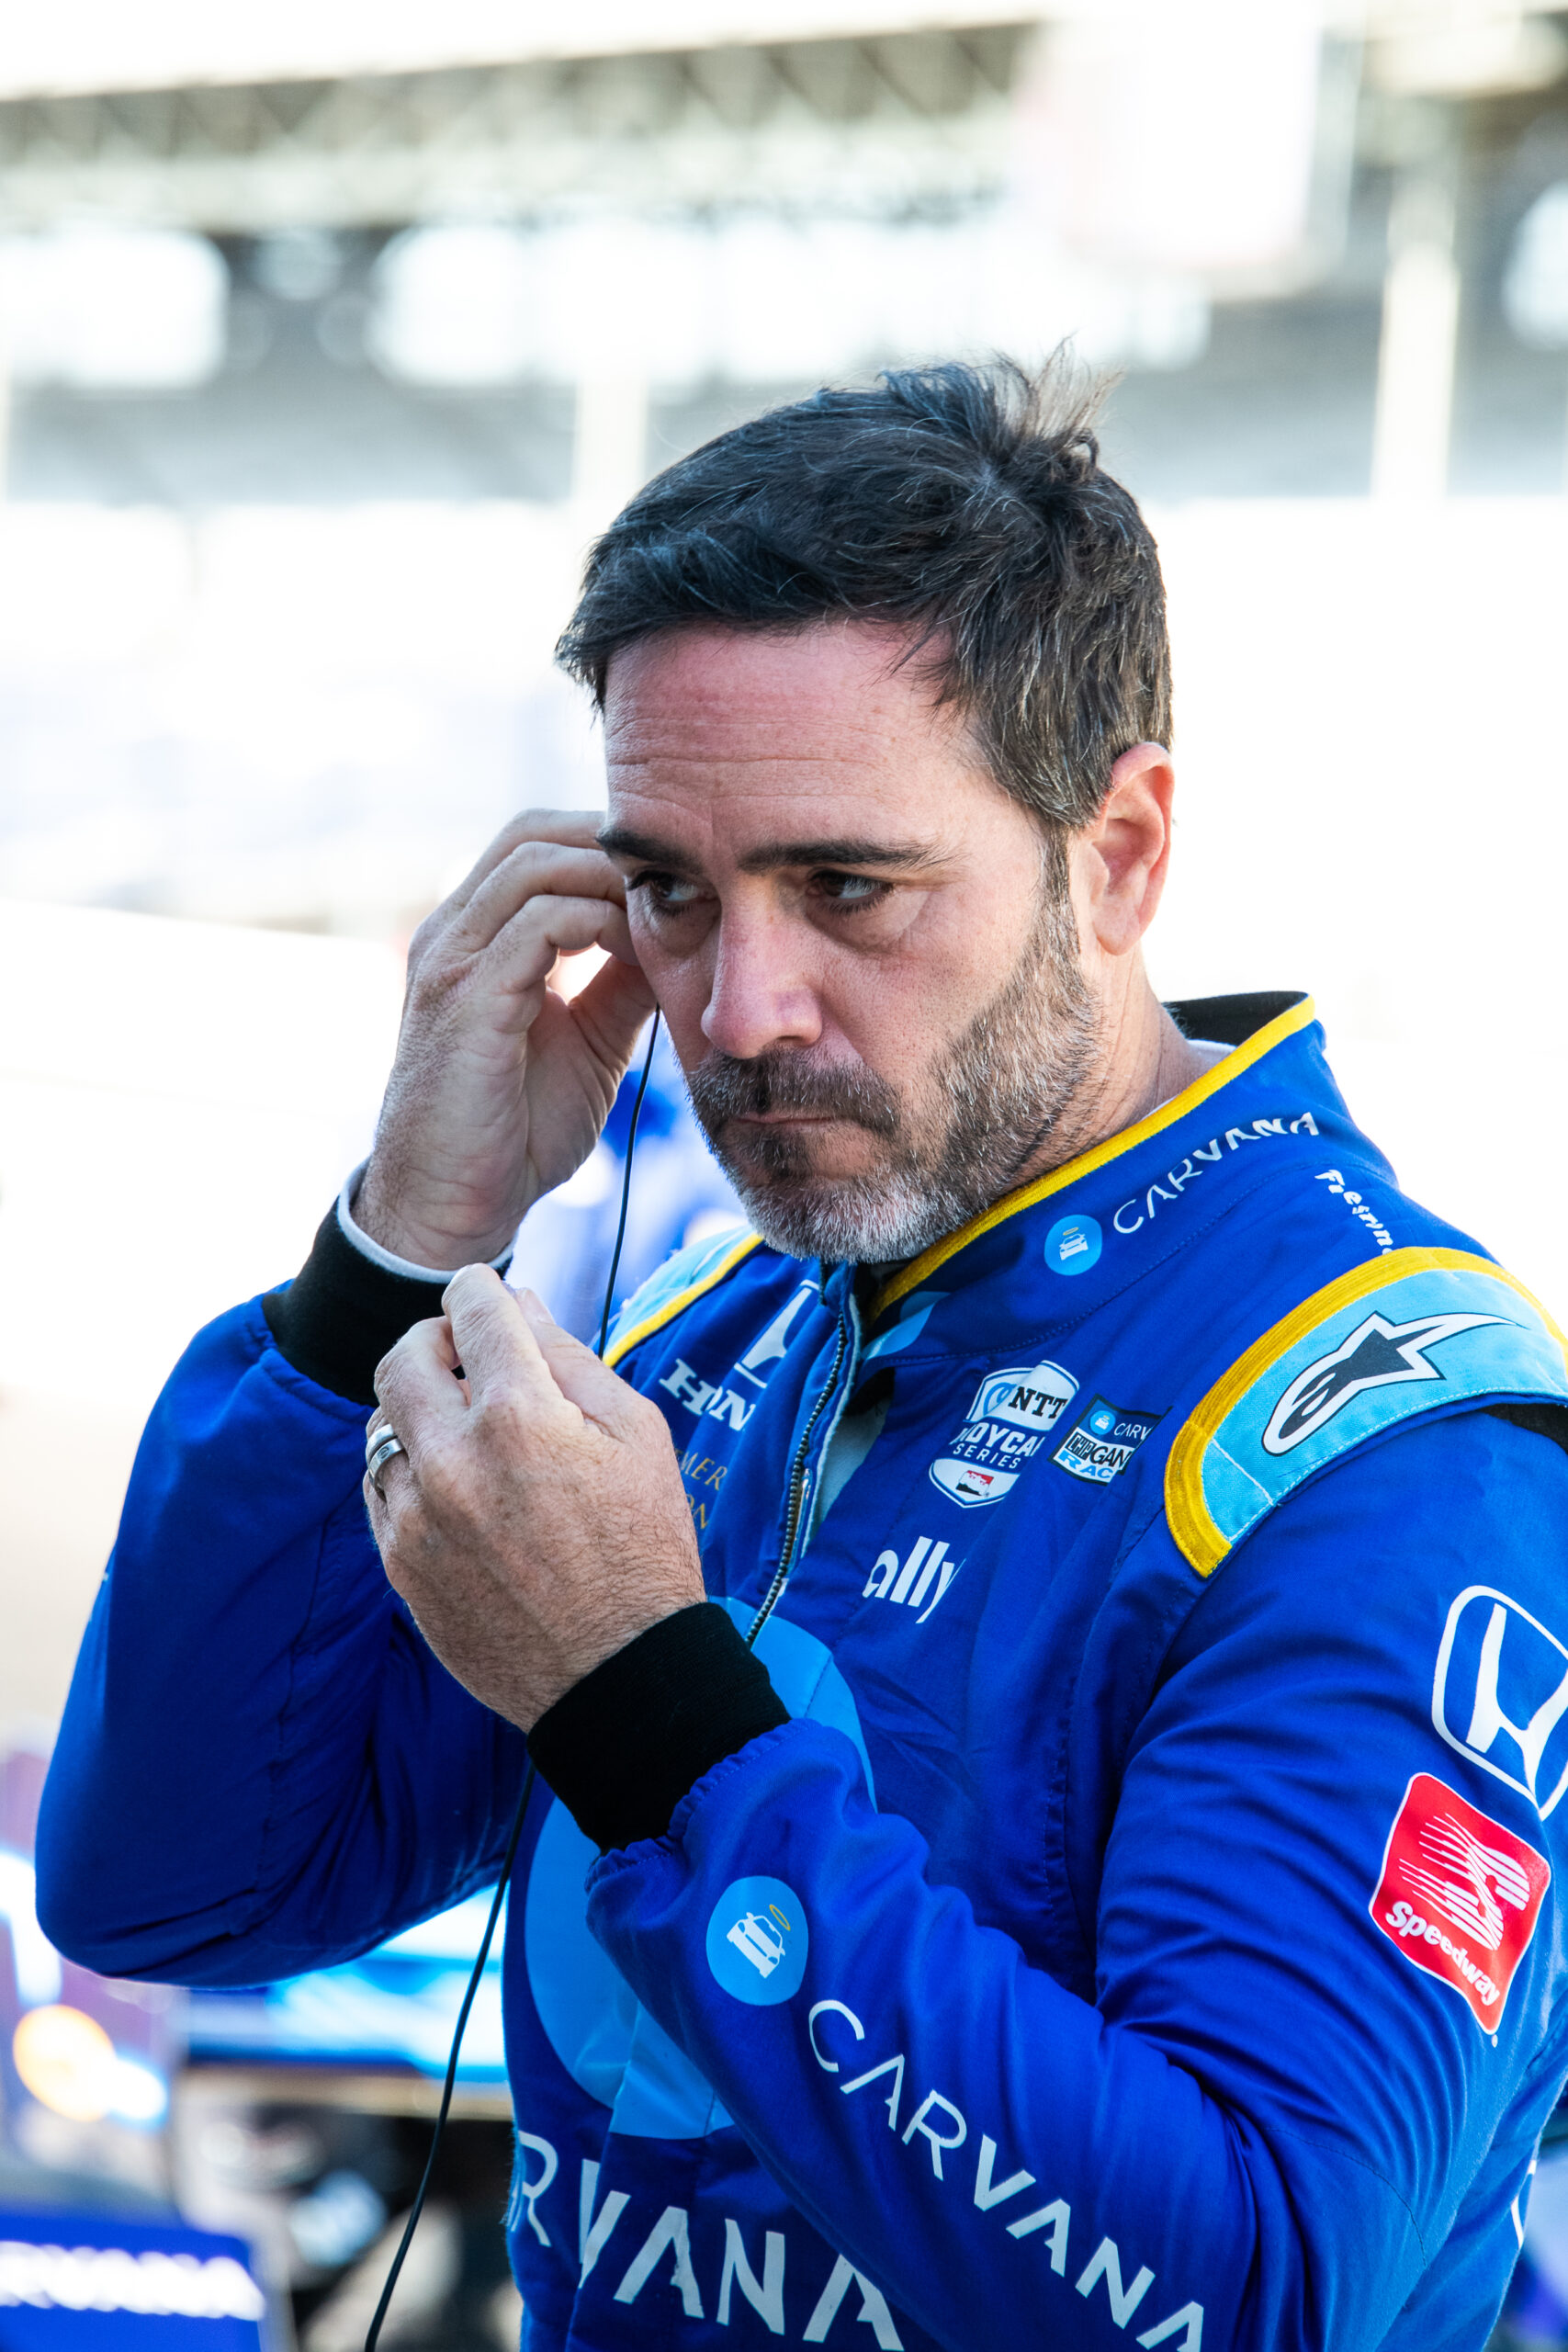 Nevertheless, Johnson appreciates the words from a newly drafted NFL player. (Photo: Doug Matthews/INDYCAR)